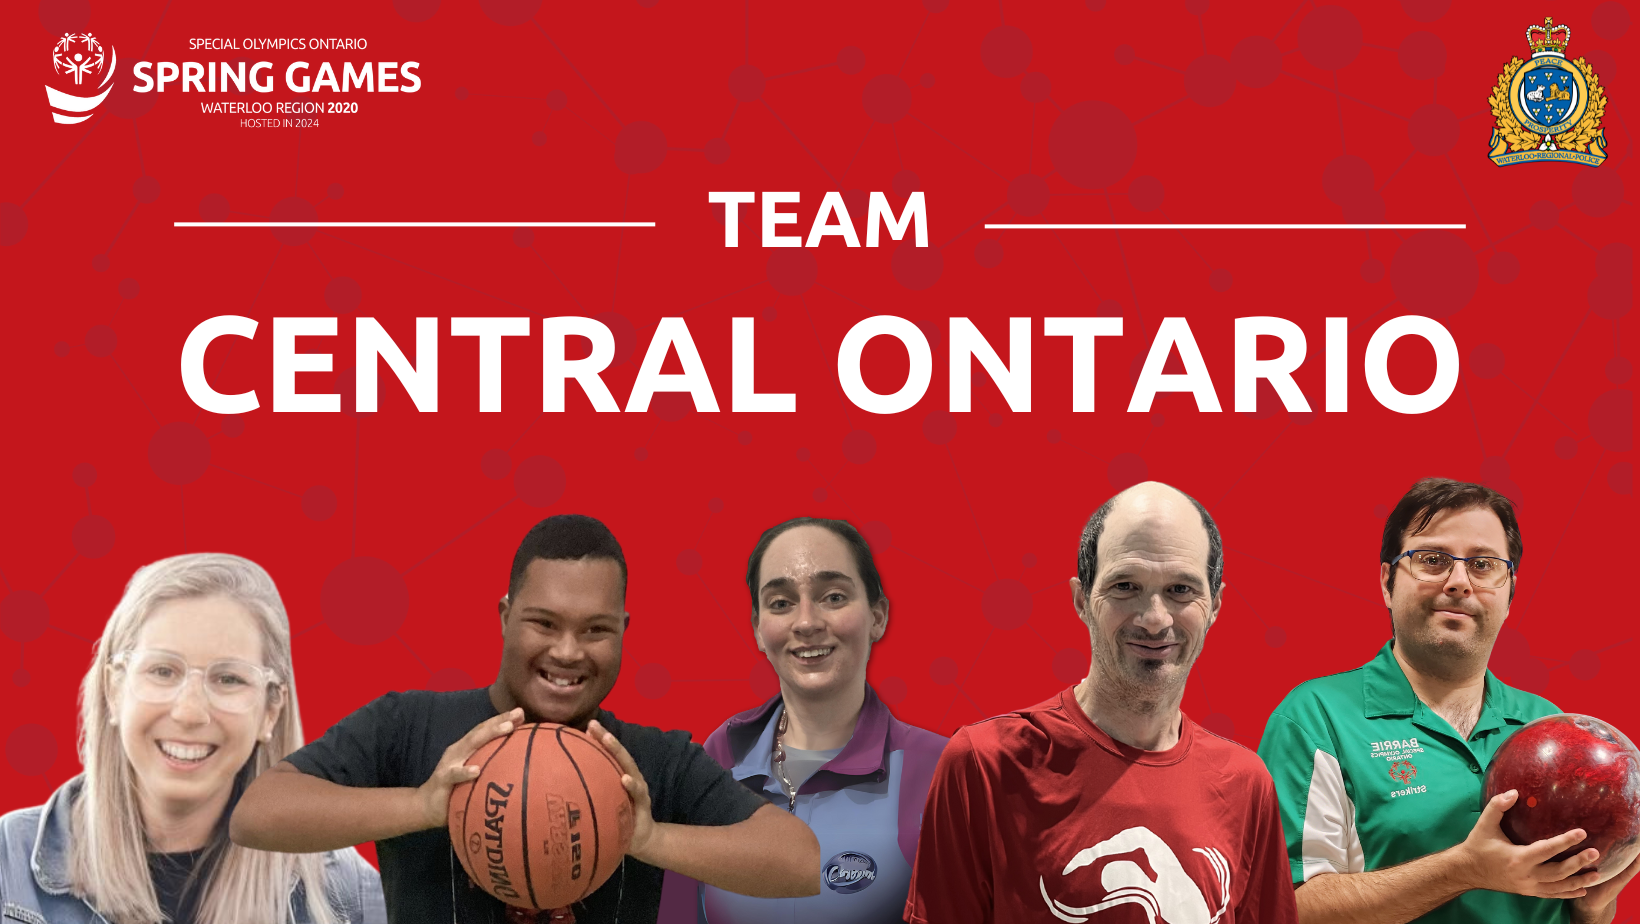 HDSB teaming up with Special Olympics Ontario for Sports Festival - Halton  Hills News